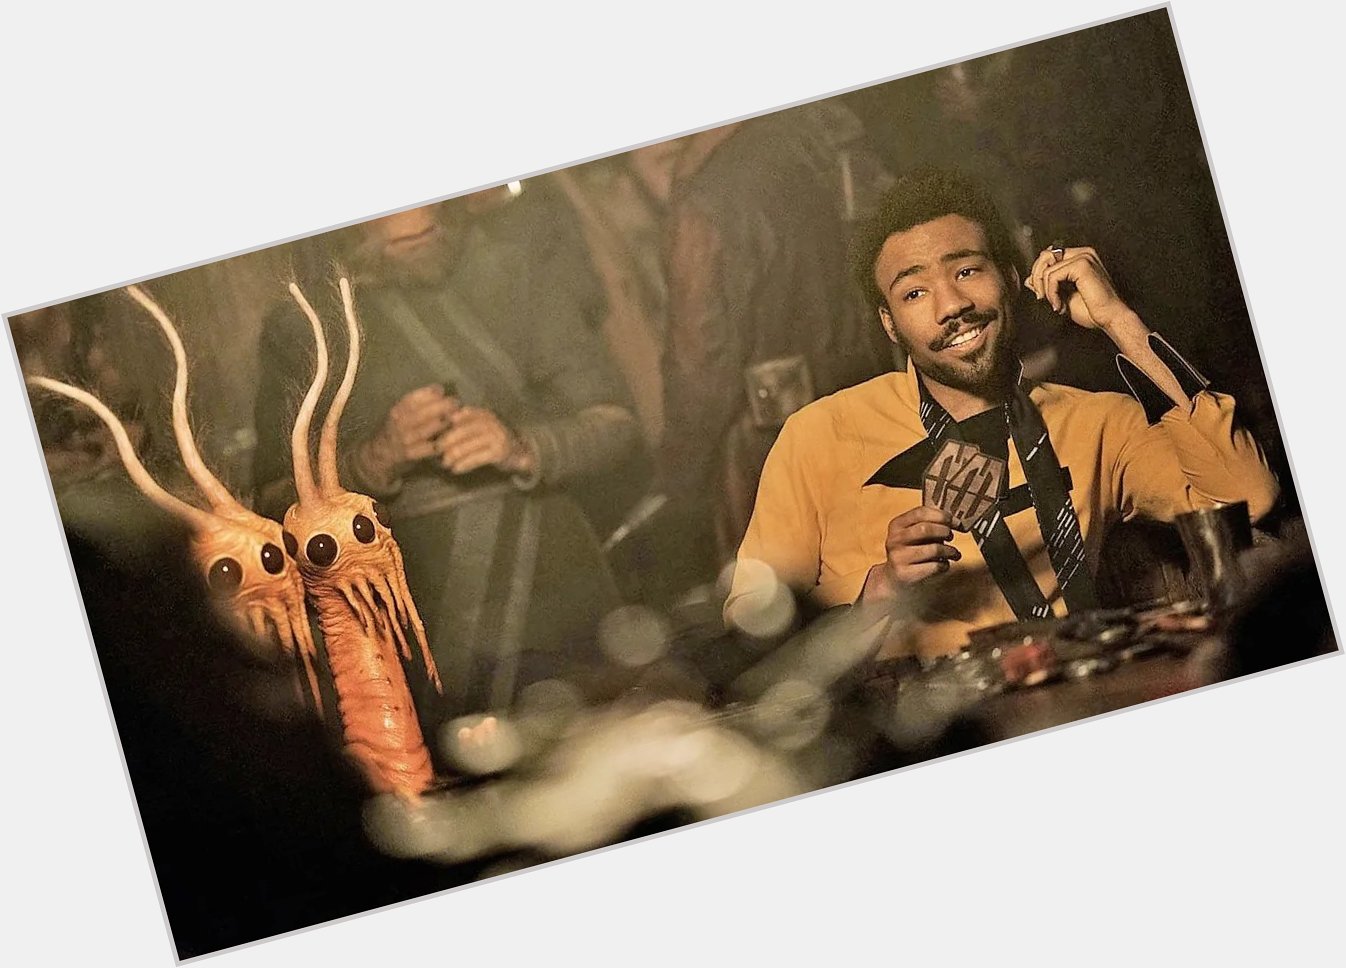 Wishing a happy 39th birthday to Solo\s own Lando Calrissian, Donald Glover! 